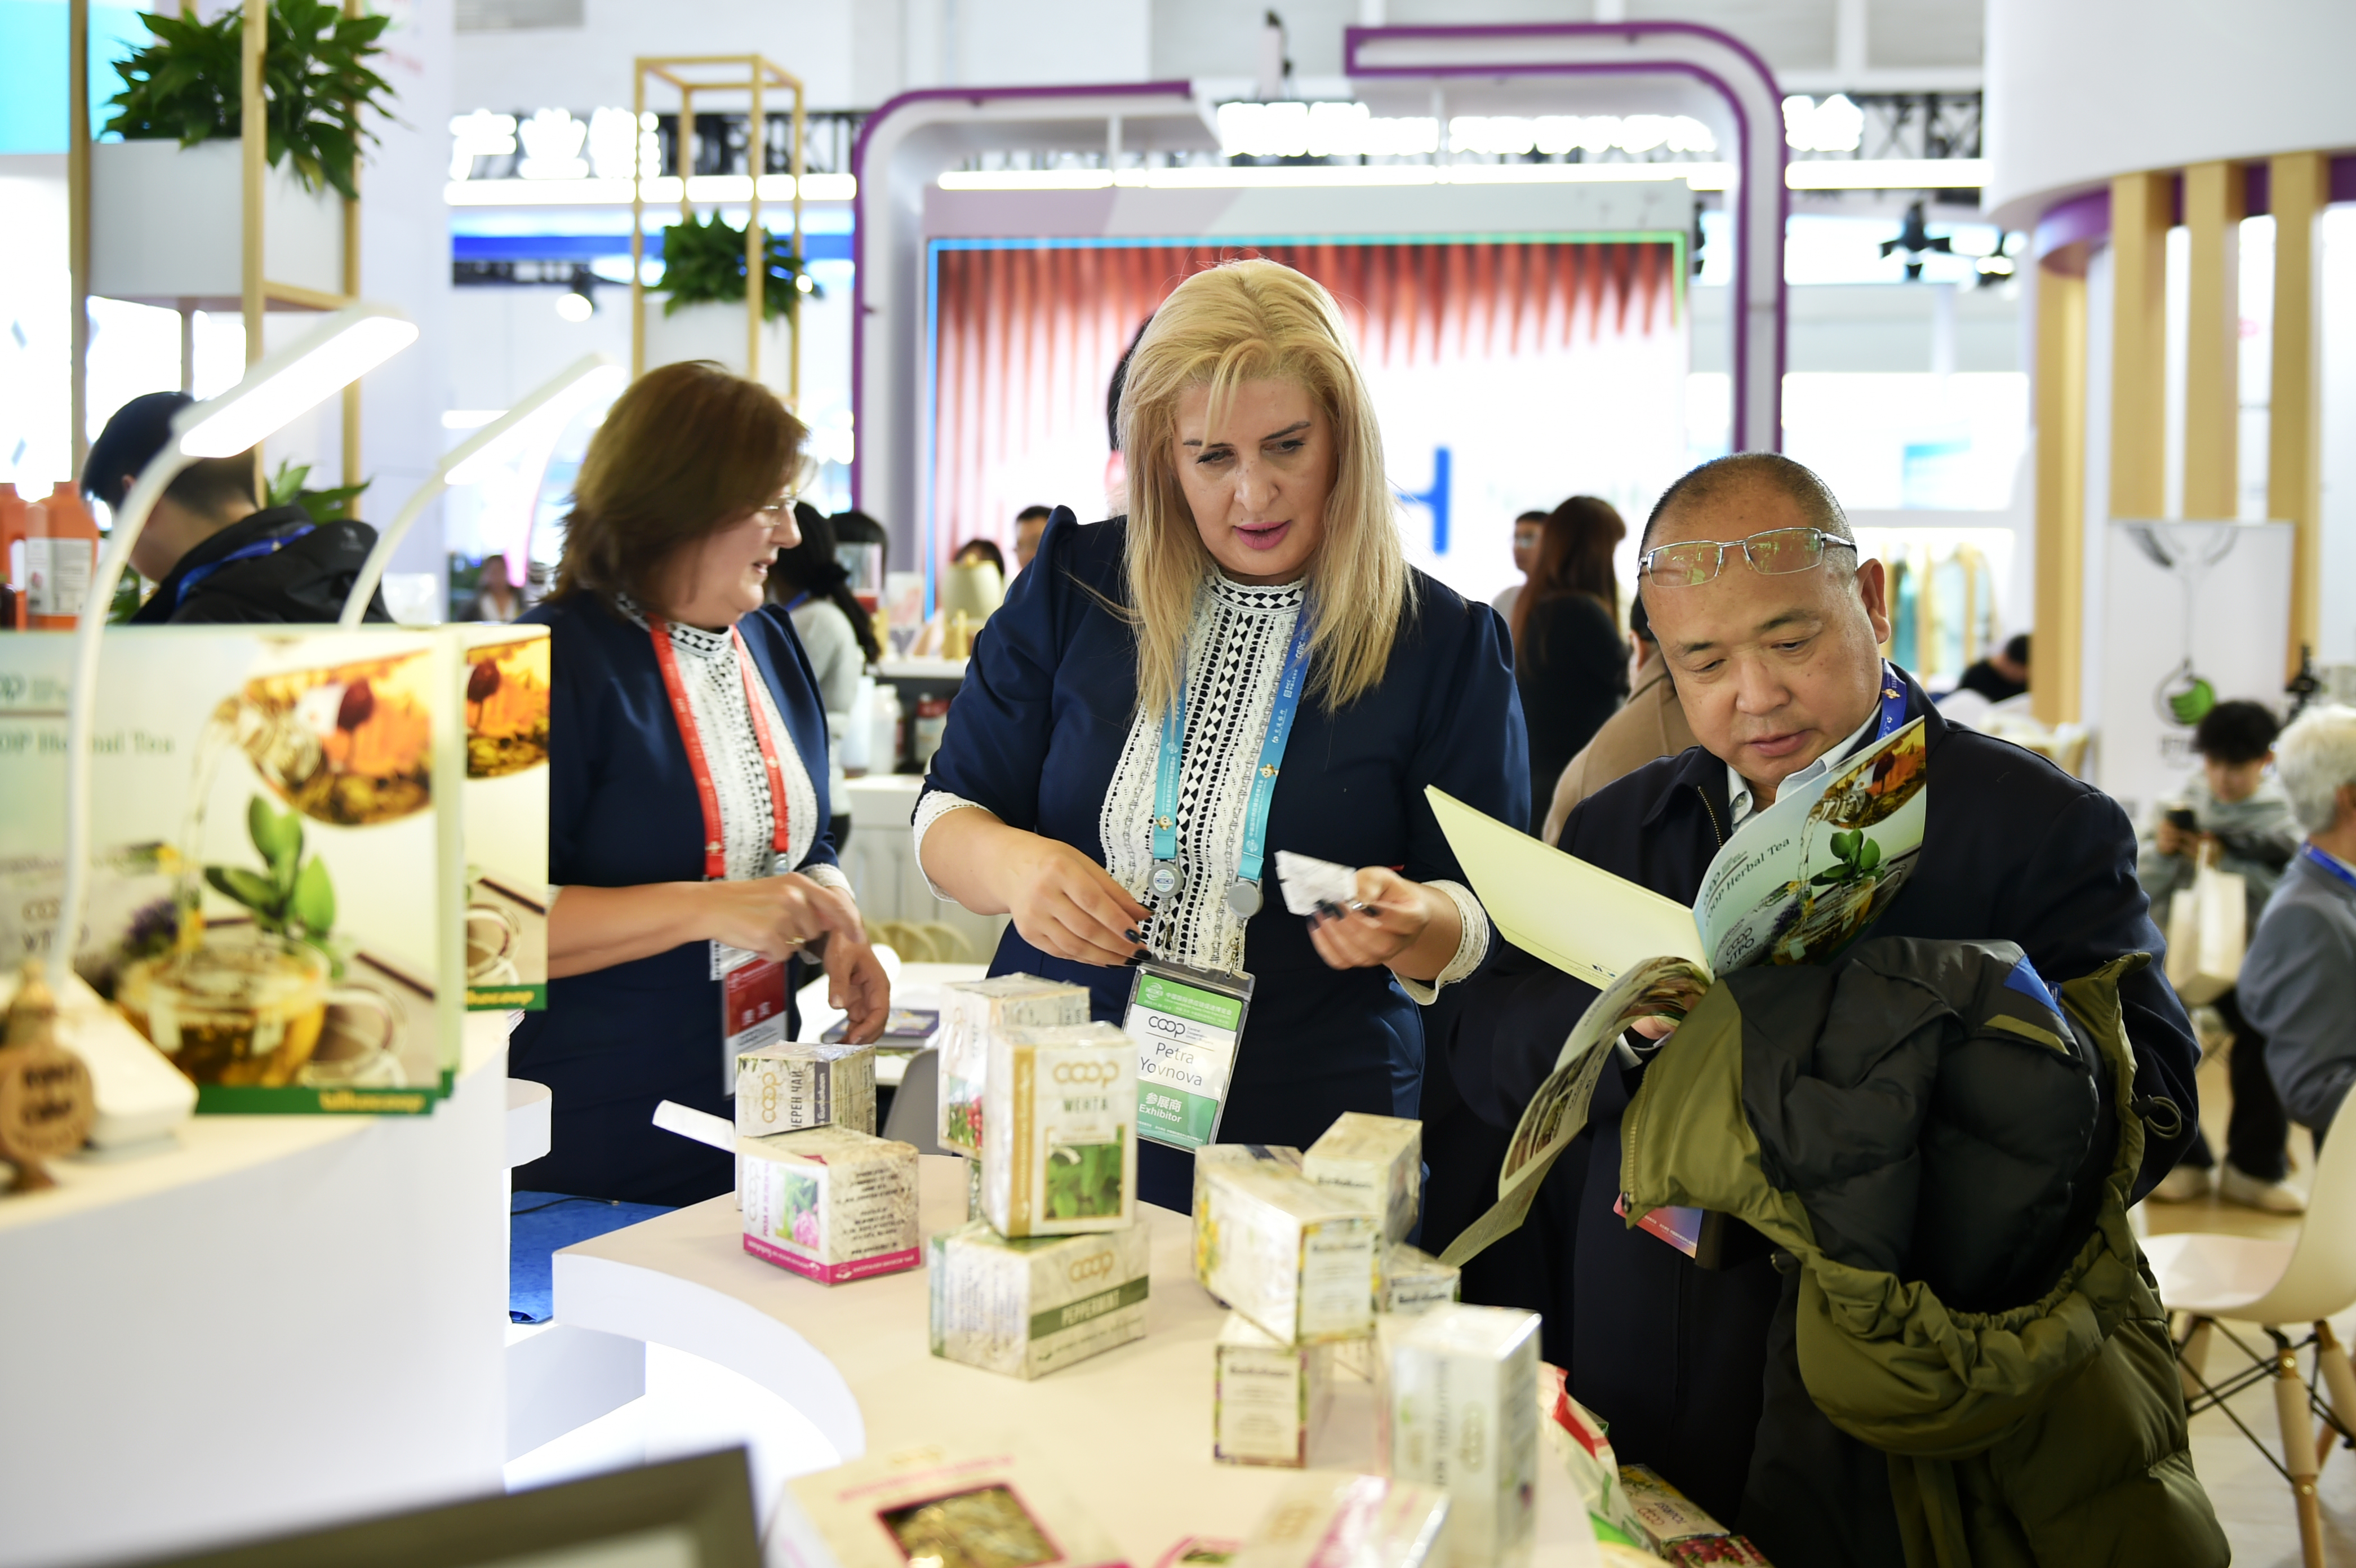 Participants browse the products. (China News Network/Li Jun)